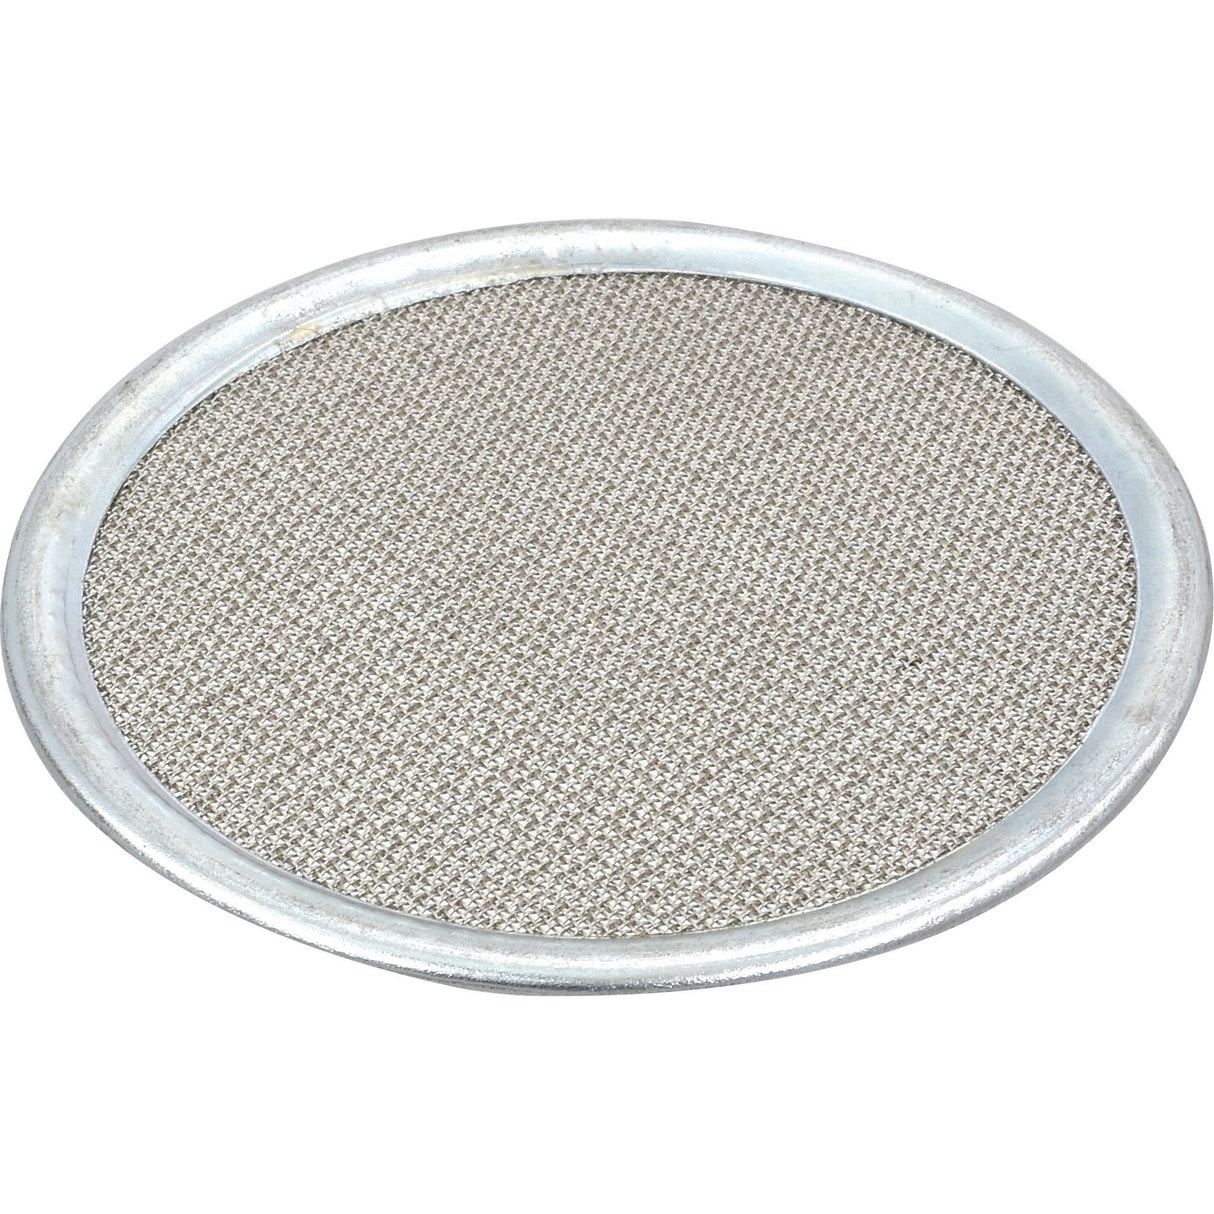 Filter for Plastic Funnels
 - S.6392 - Farming Parts